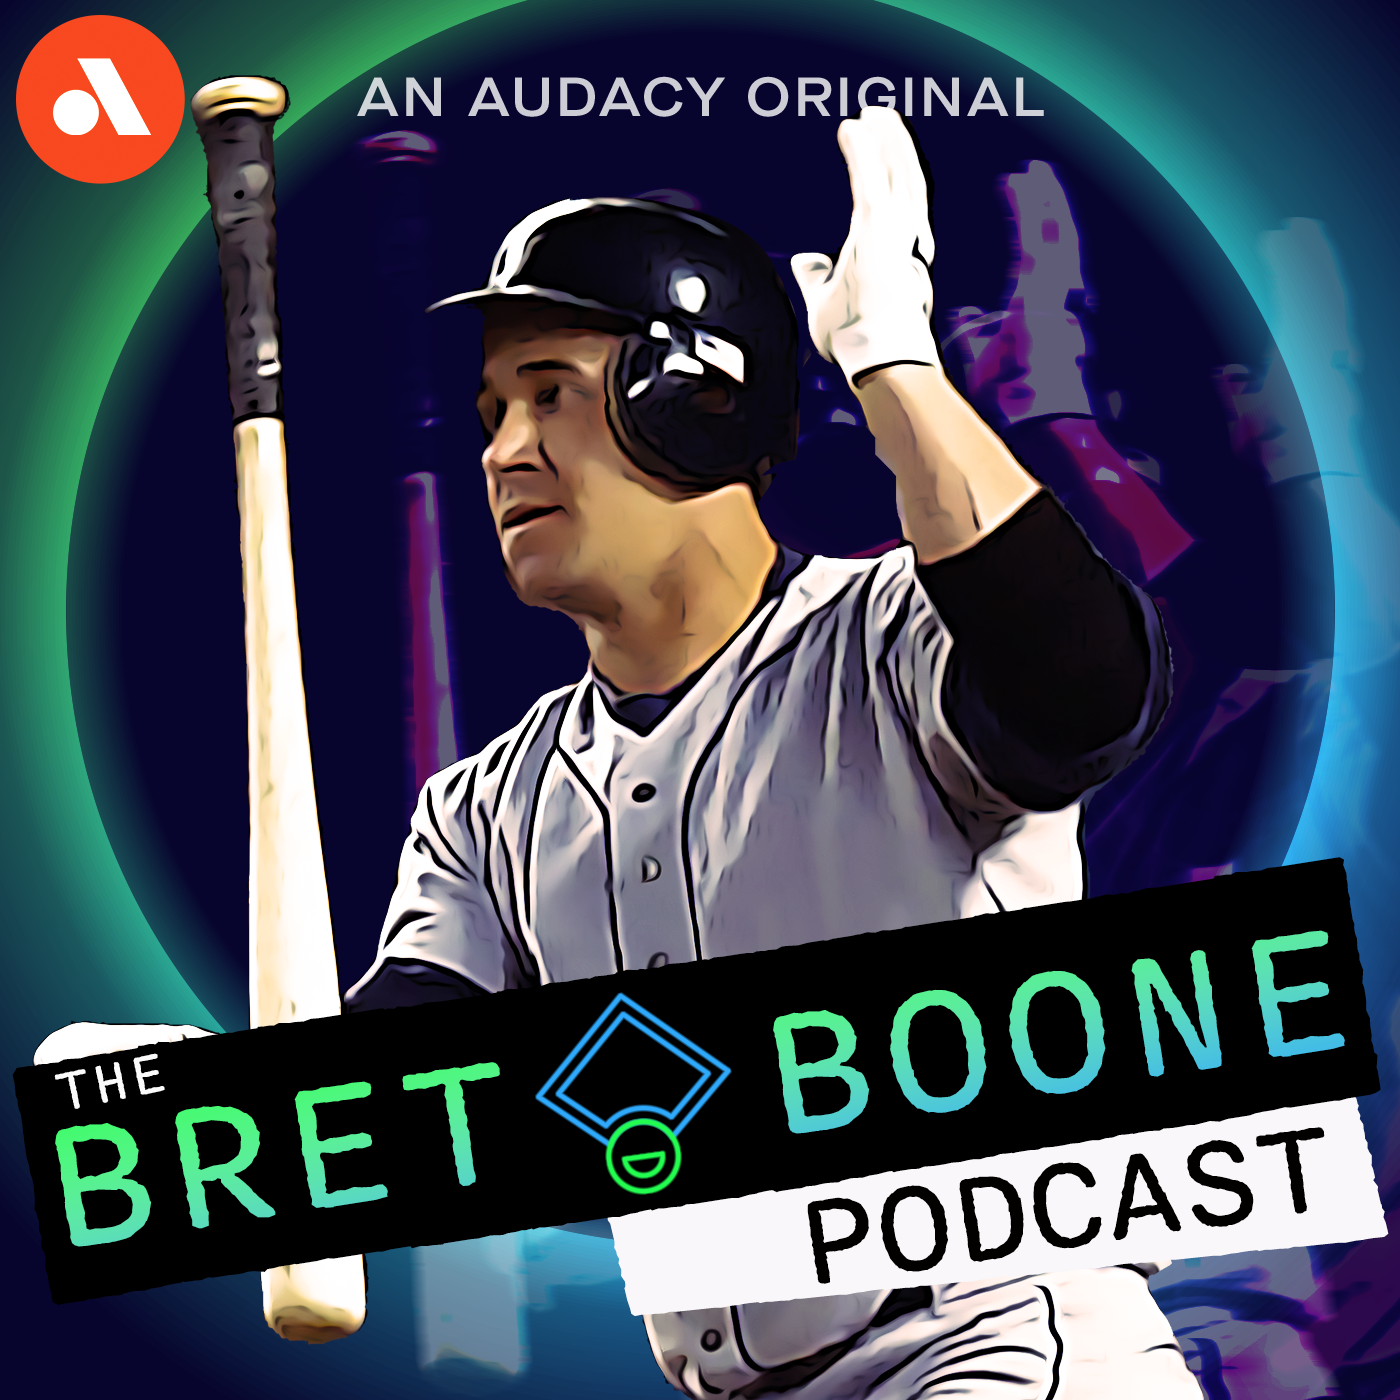 Padres Broadcaster Mark "Mud" Grant Joins | 'The Bret Boone Podcast'